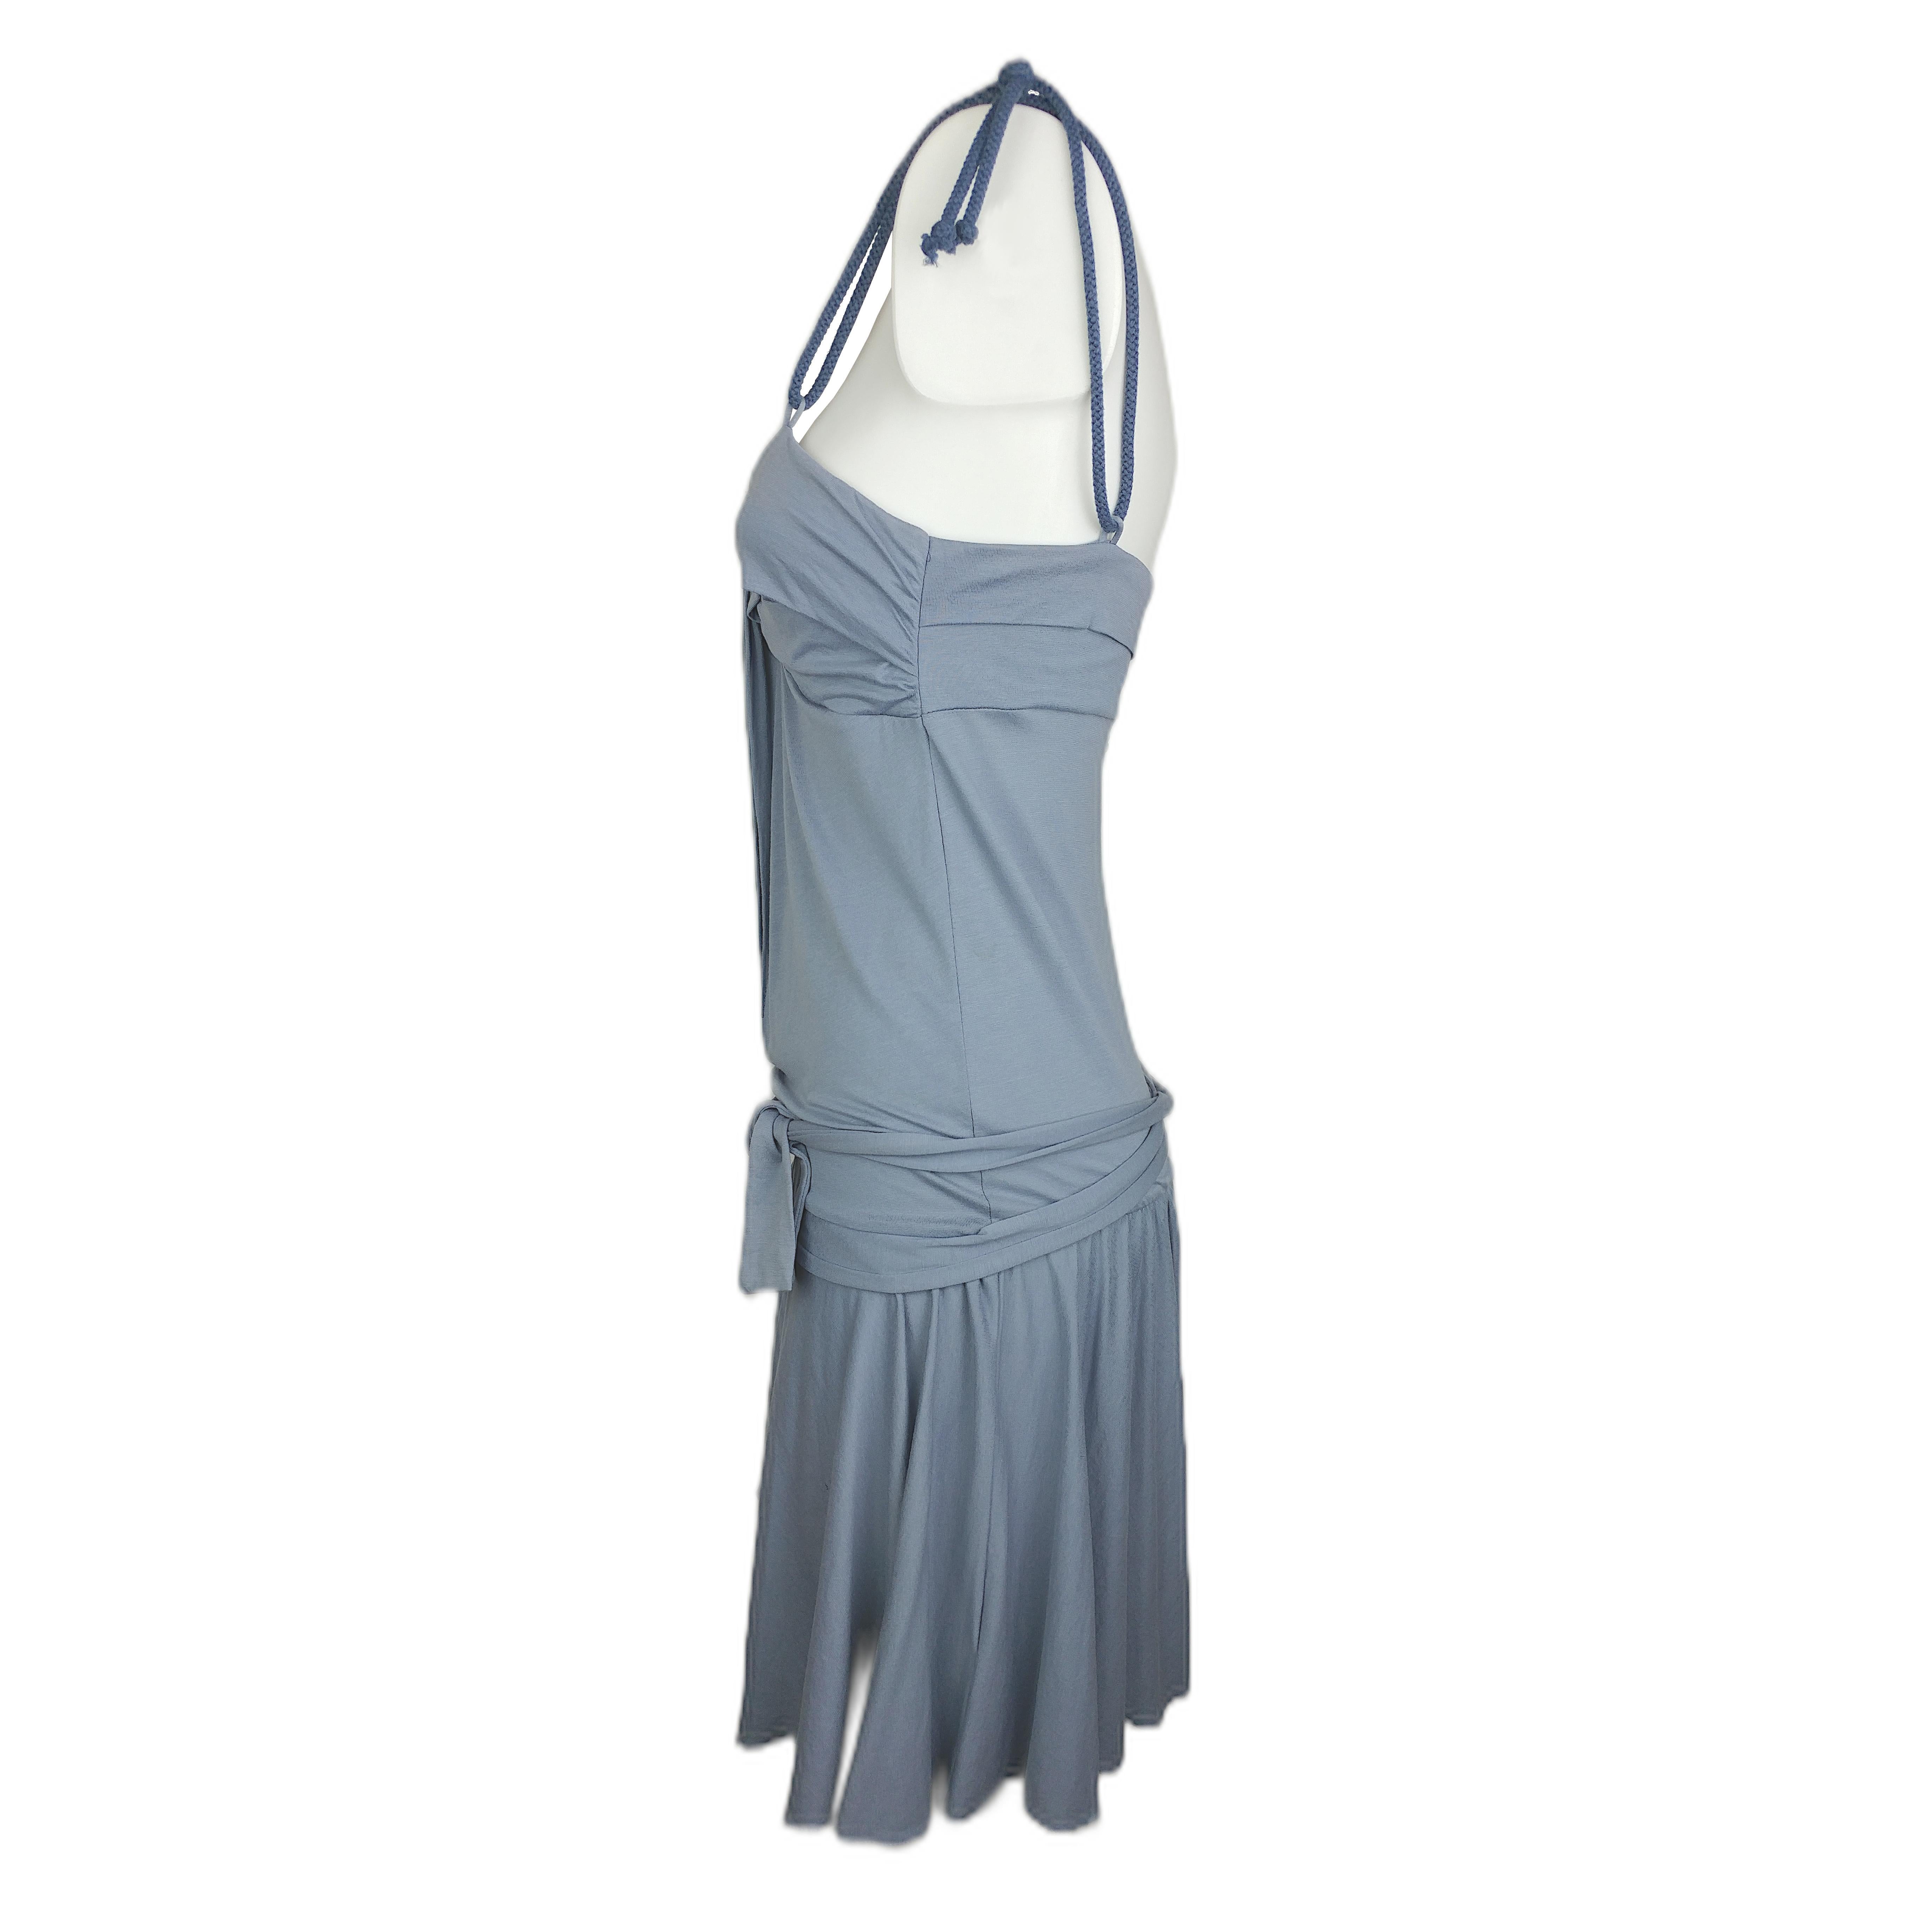 The turquoise dress we are offering has a full circle skirt and rope straps. It features a rear closure with three buttons, a waist belt made of the same fabric as the dress and it is very comfortable for any spring/summer event. It is in good